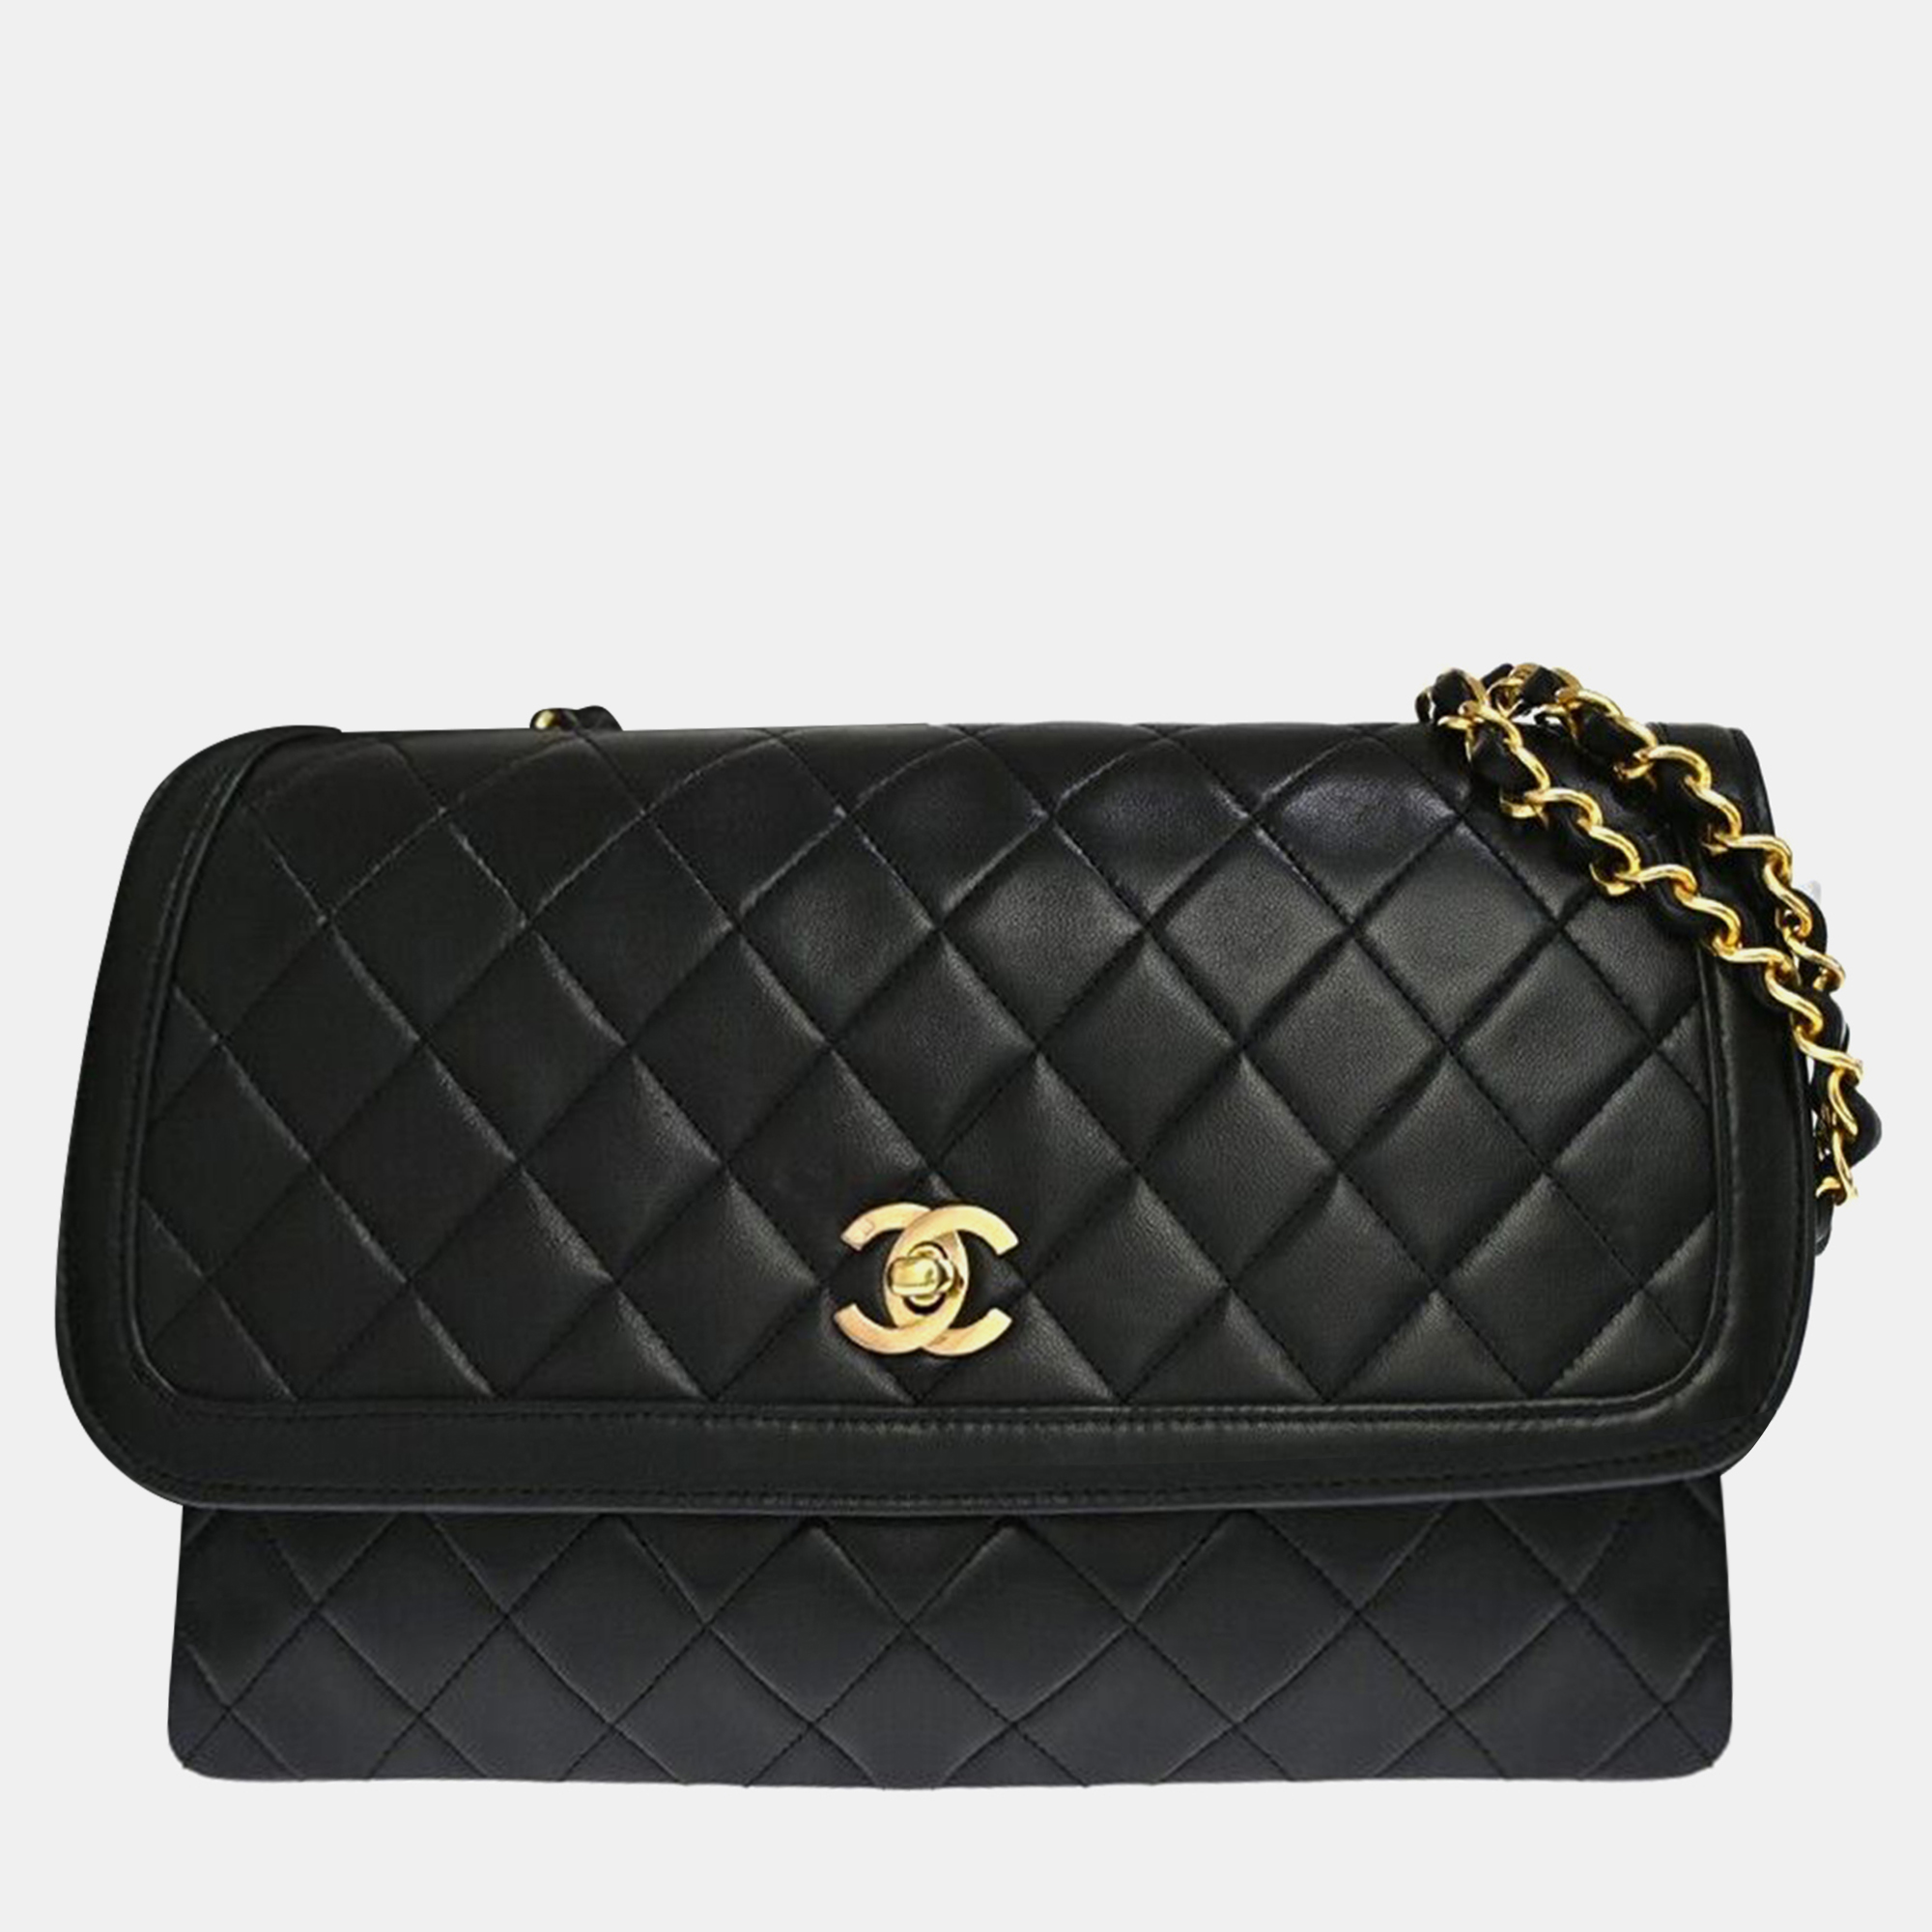 Pre-owned Chanel Black Leather Mademoiselle Bag